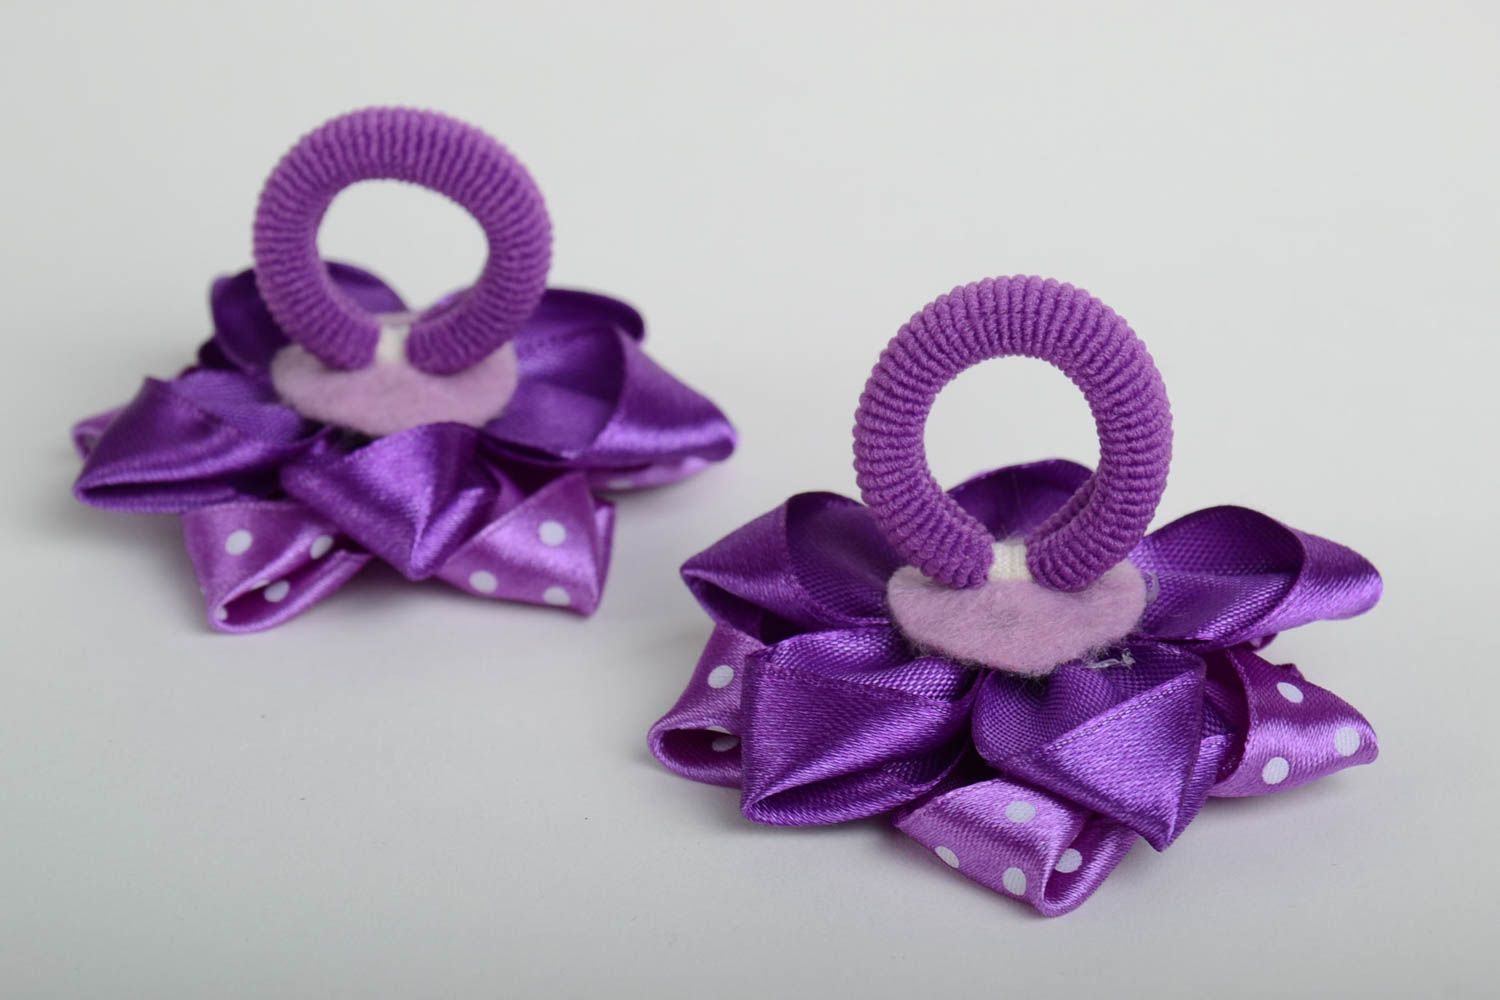 Handmade hair clips with violet satin ribbon kanzashi flowers set of 2 items photo 2